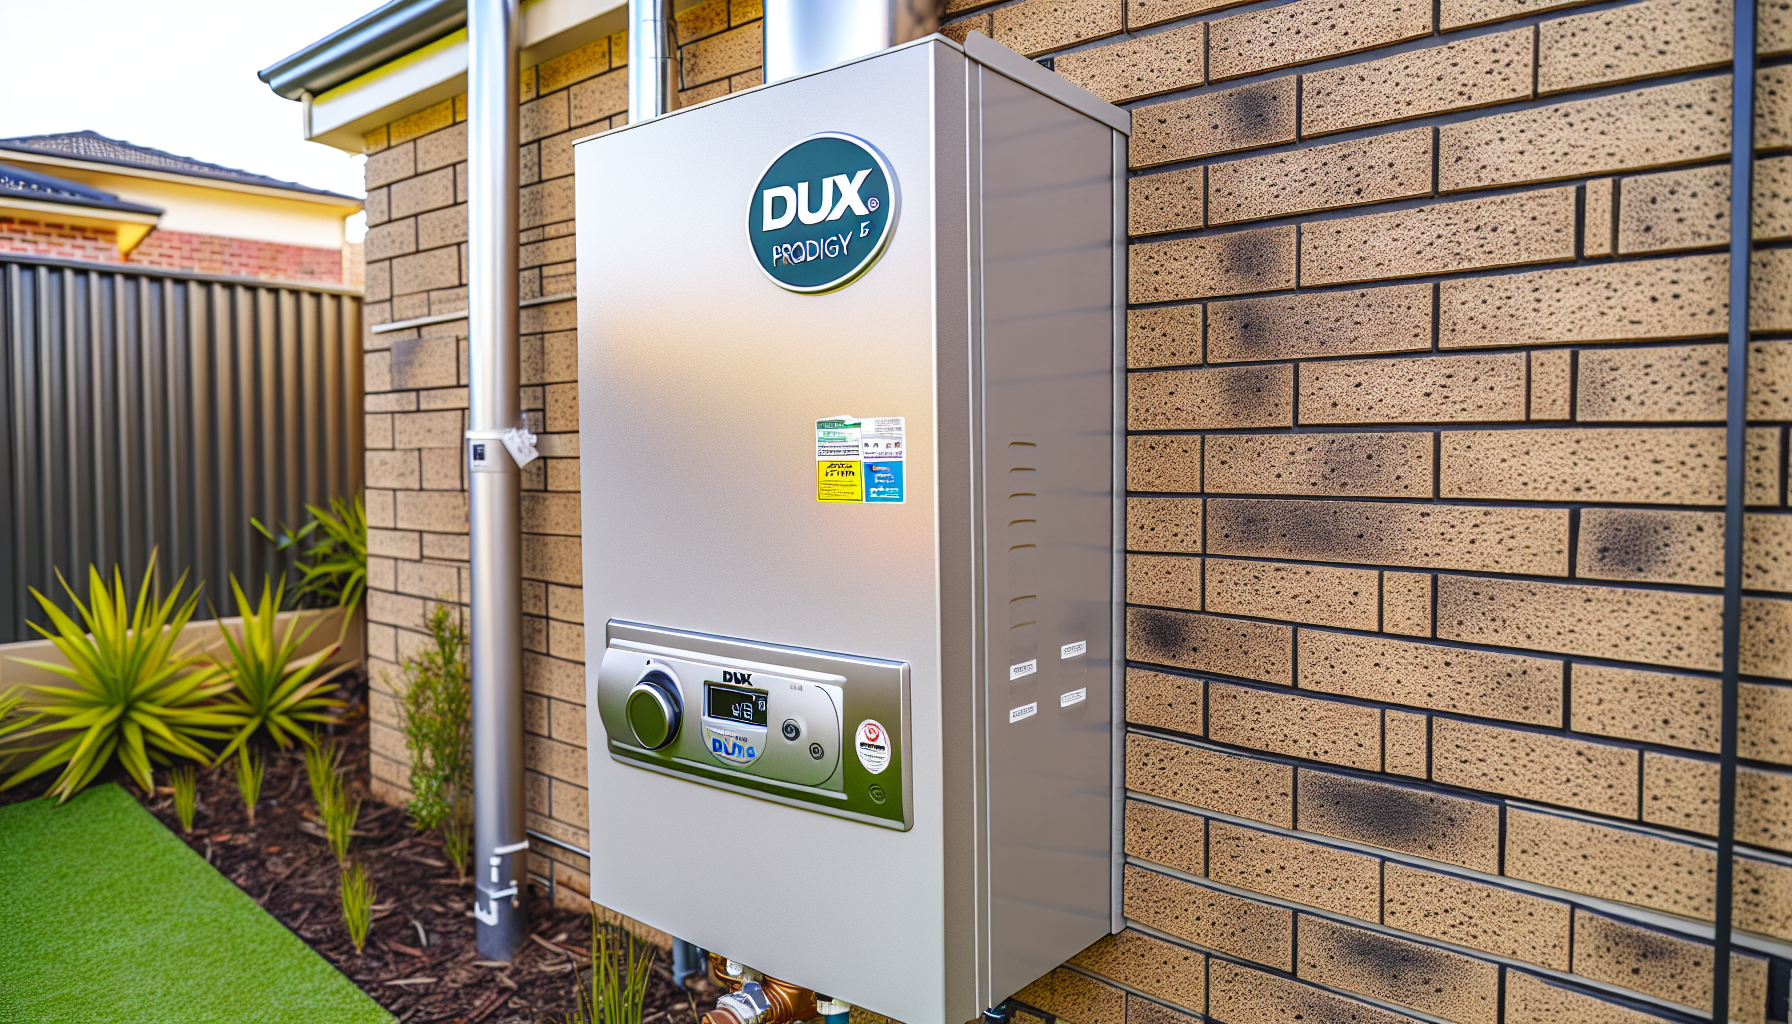 Photo of Dux Prodigy 5 gas storage hot water system